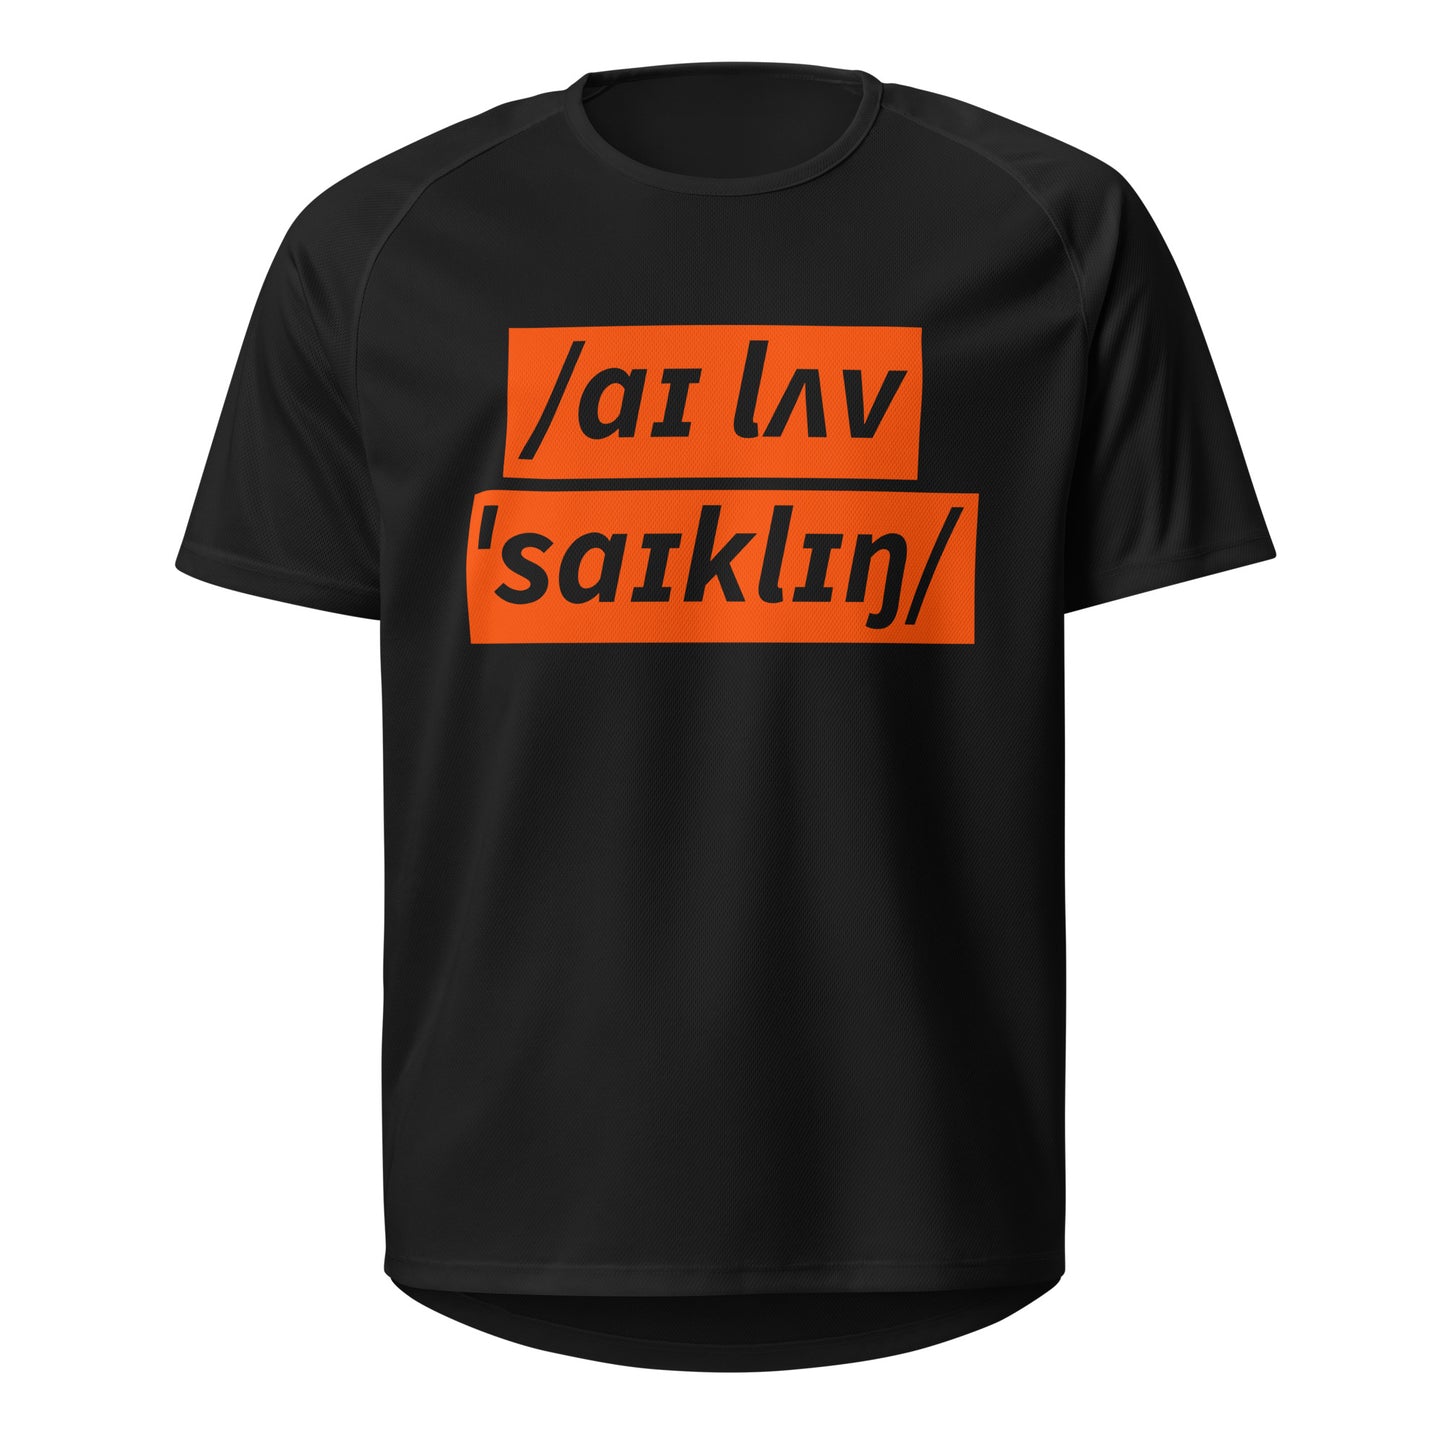 I Love Cycling Sports Jersey, Adult Cyclist